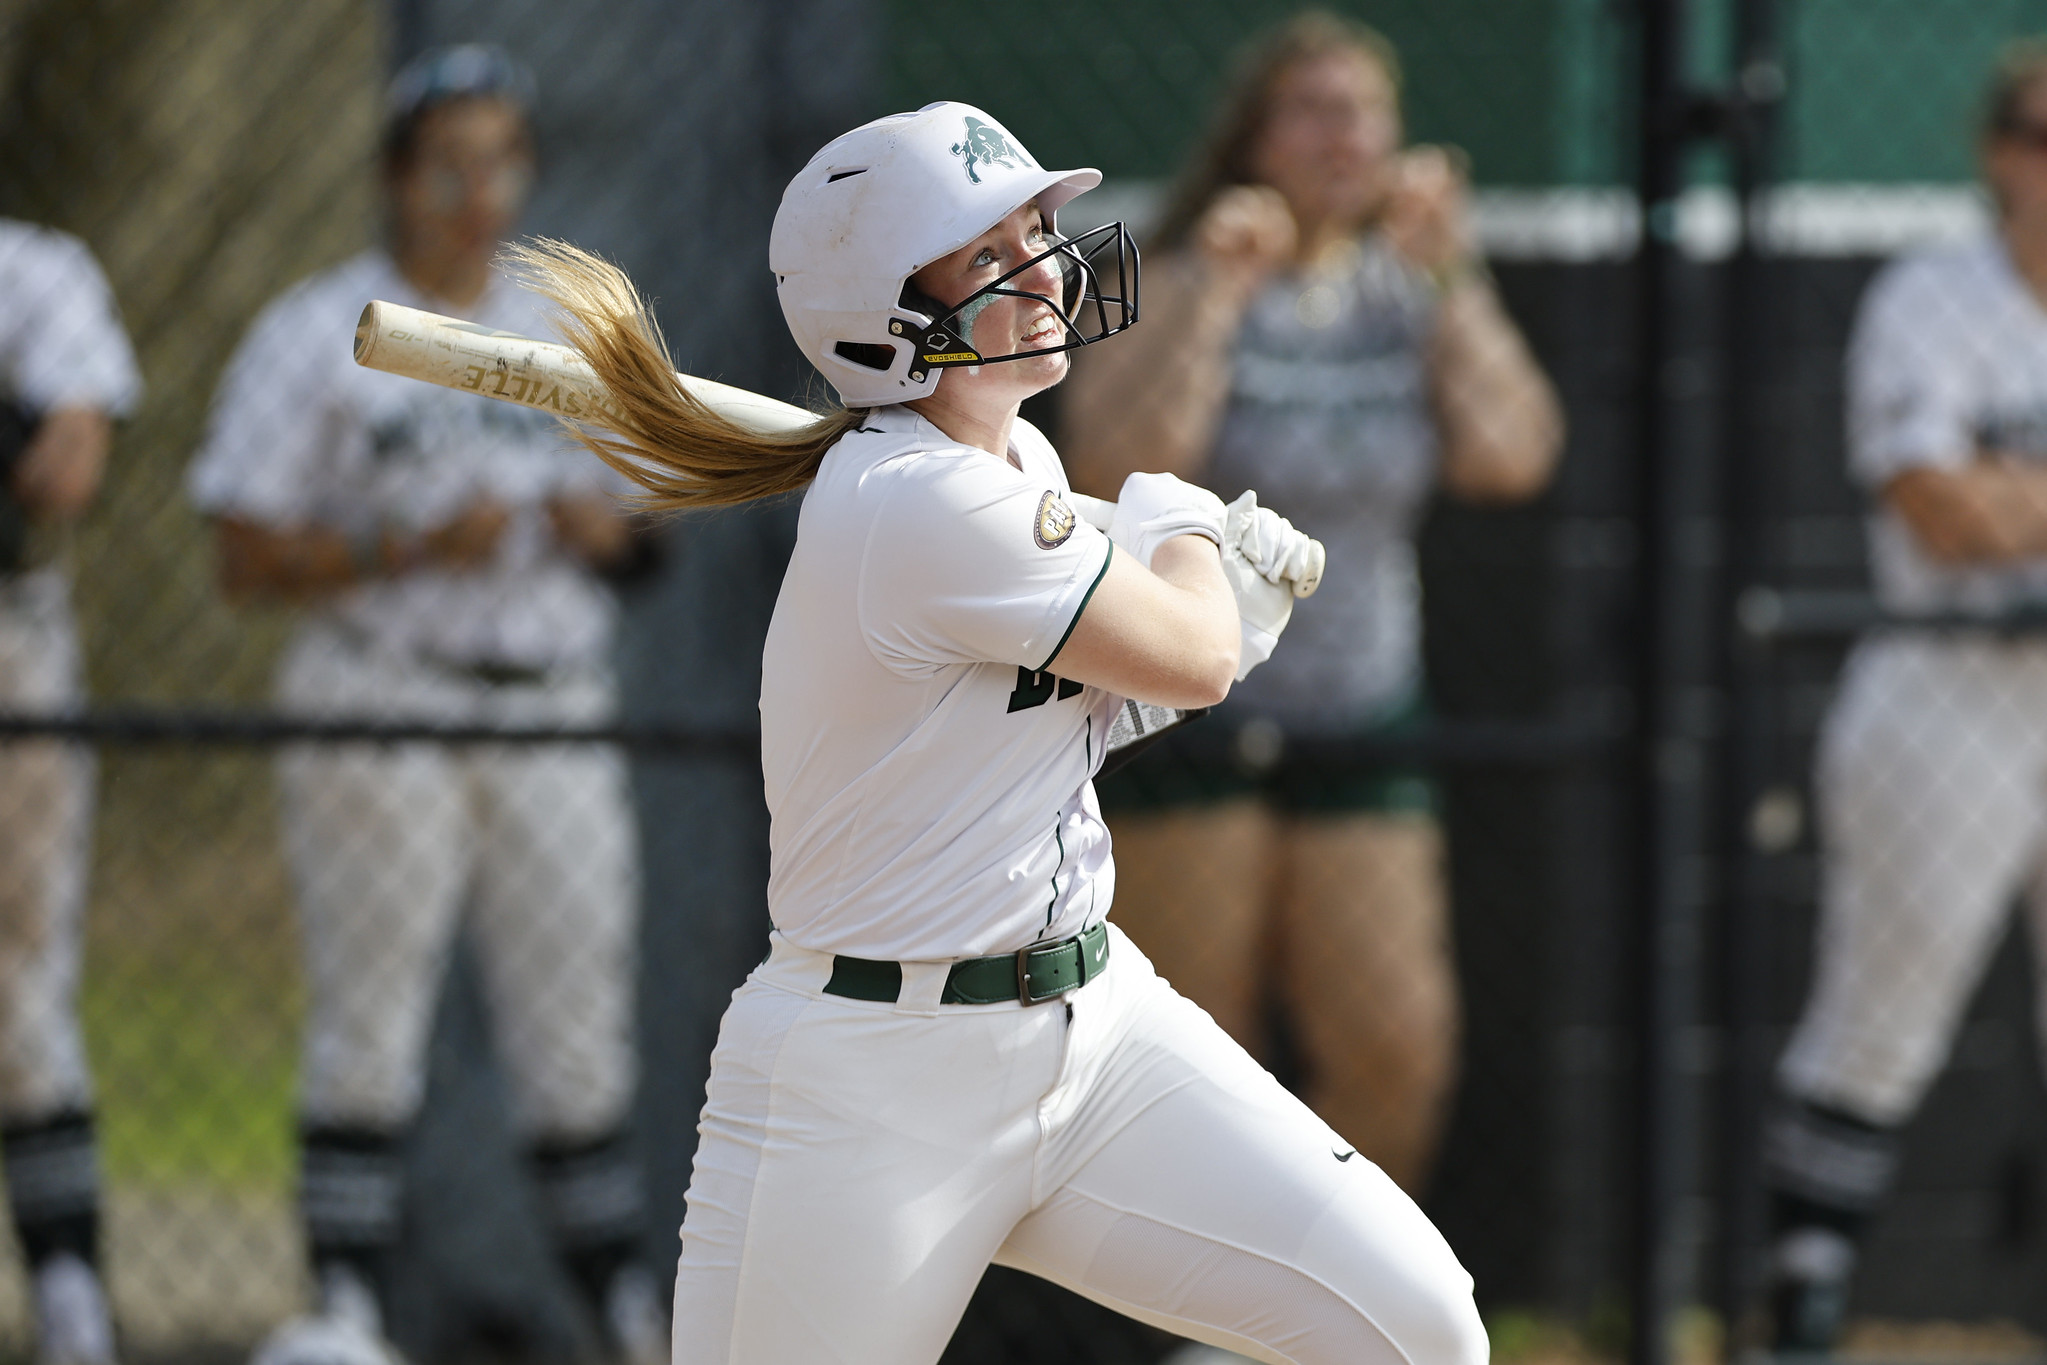 Softball: Bison Split in Two Close Games vs Yellow Jackets